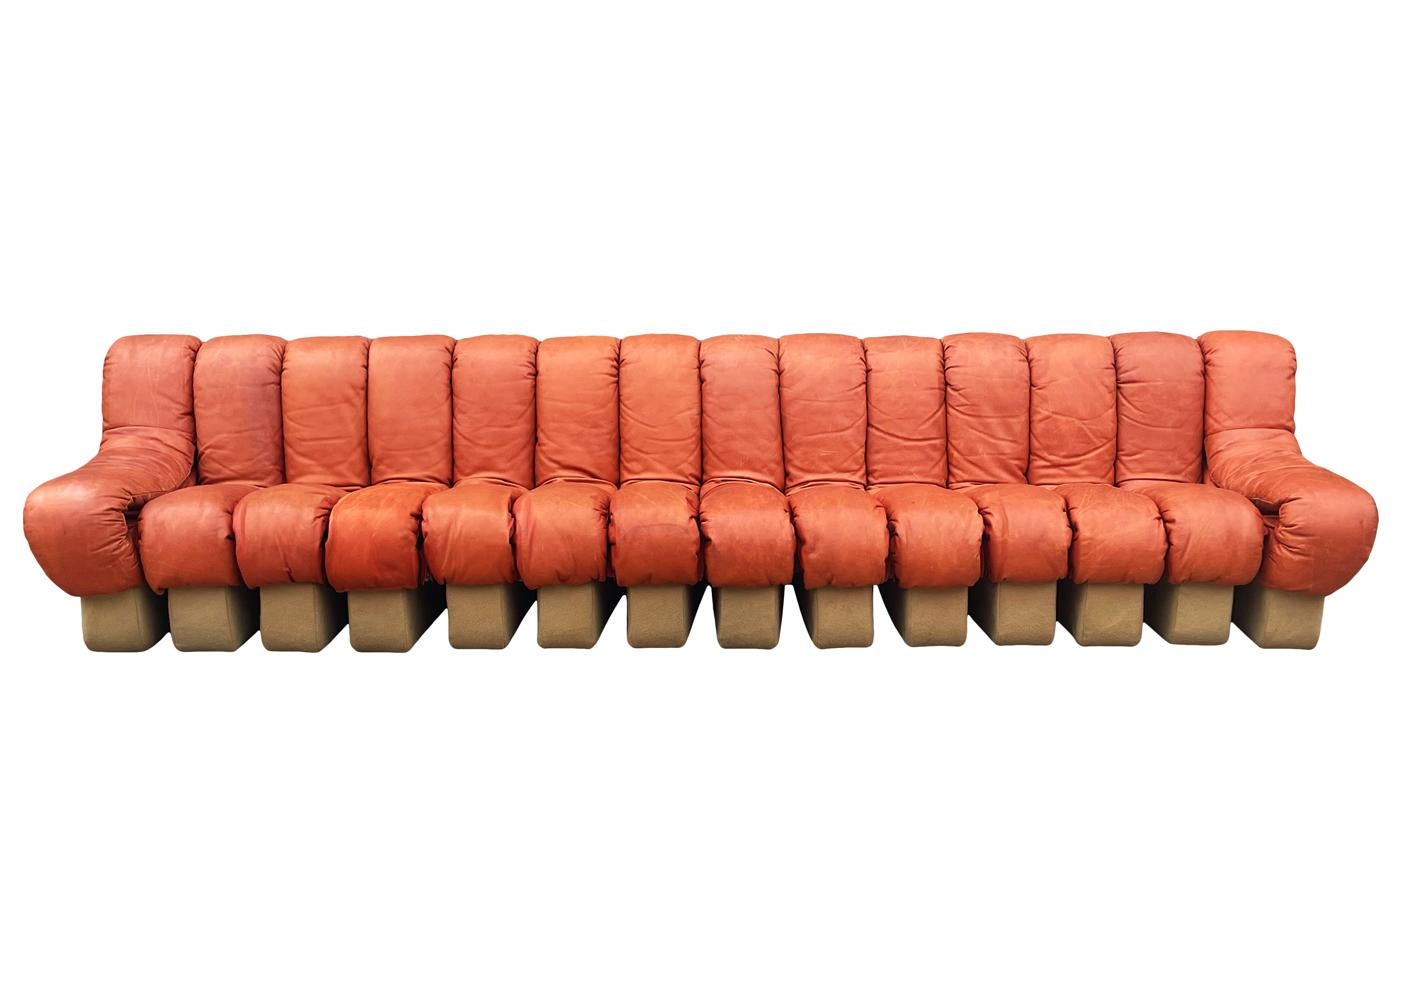 A long articulating sofa designed by Ueli Berger, produced by De Sede, and distributed by Stendig. This example features 14 elements / sections in cognac colored Italian leather and tan wool bases. 100% original in good condition. Leather displaying